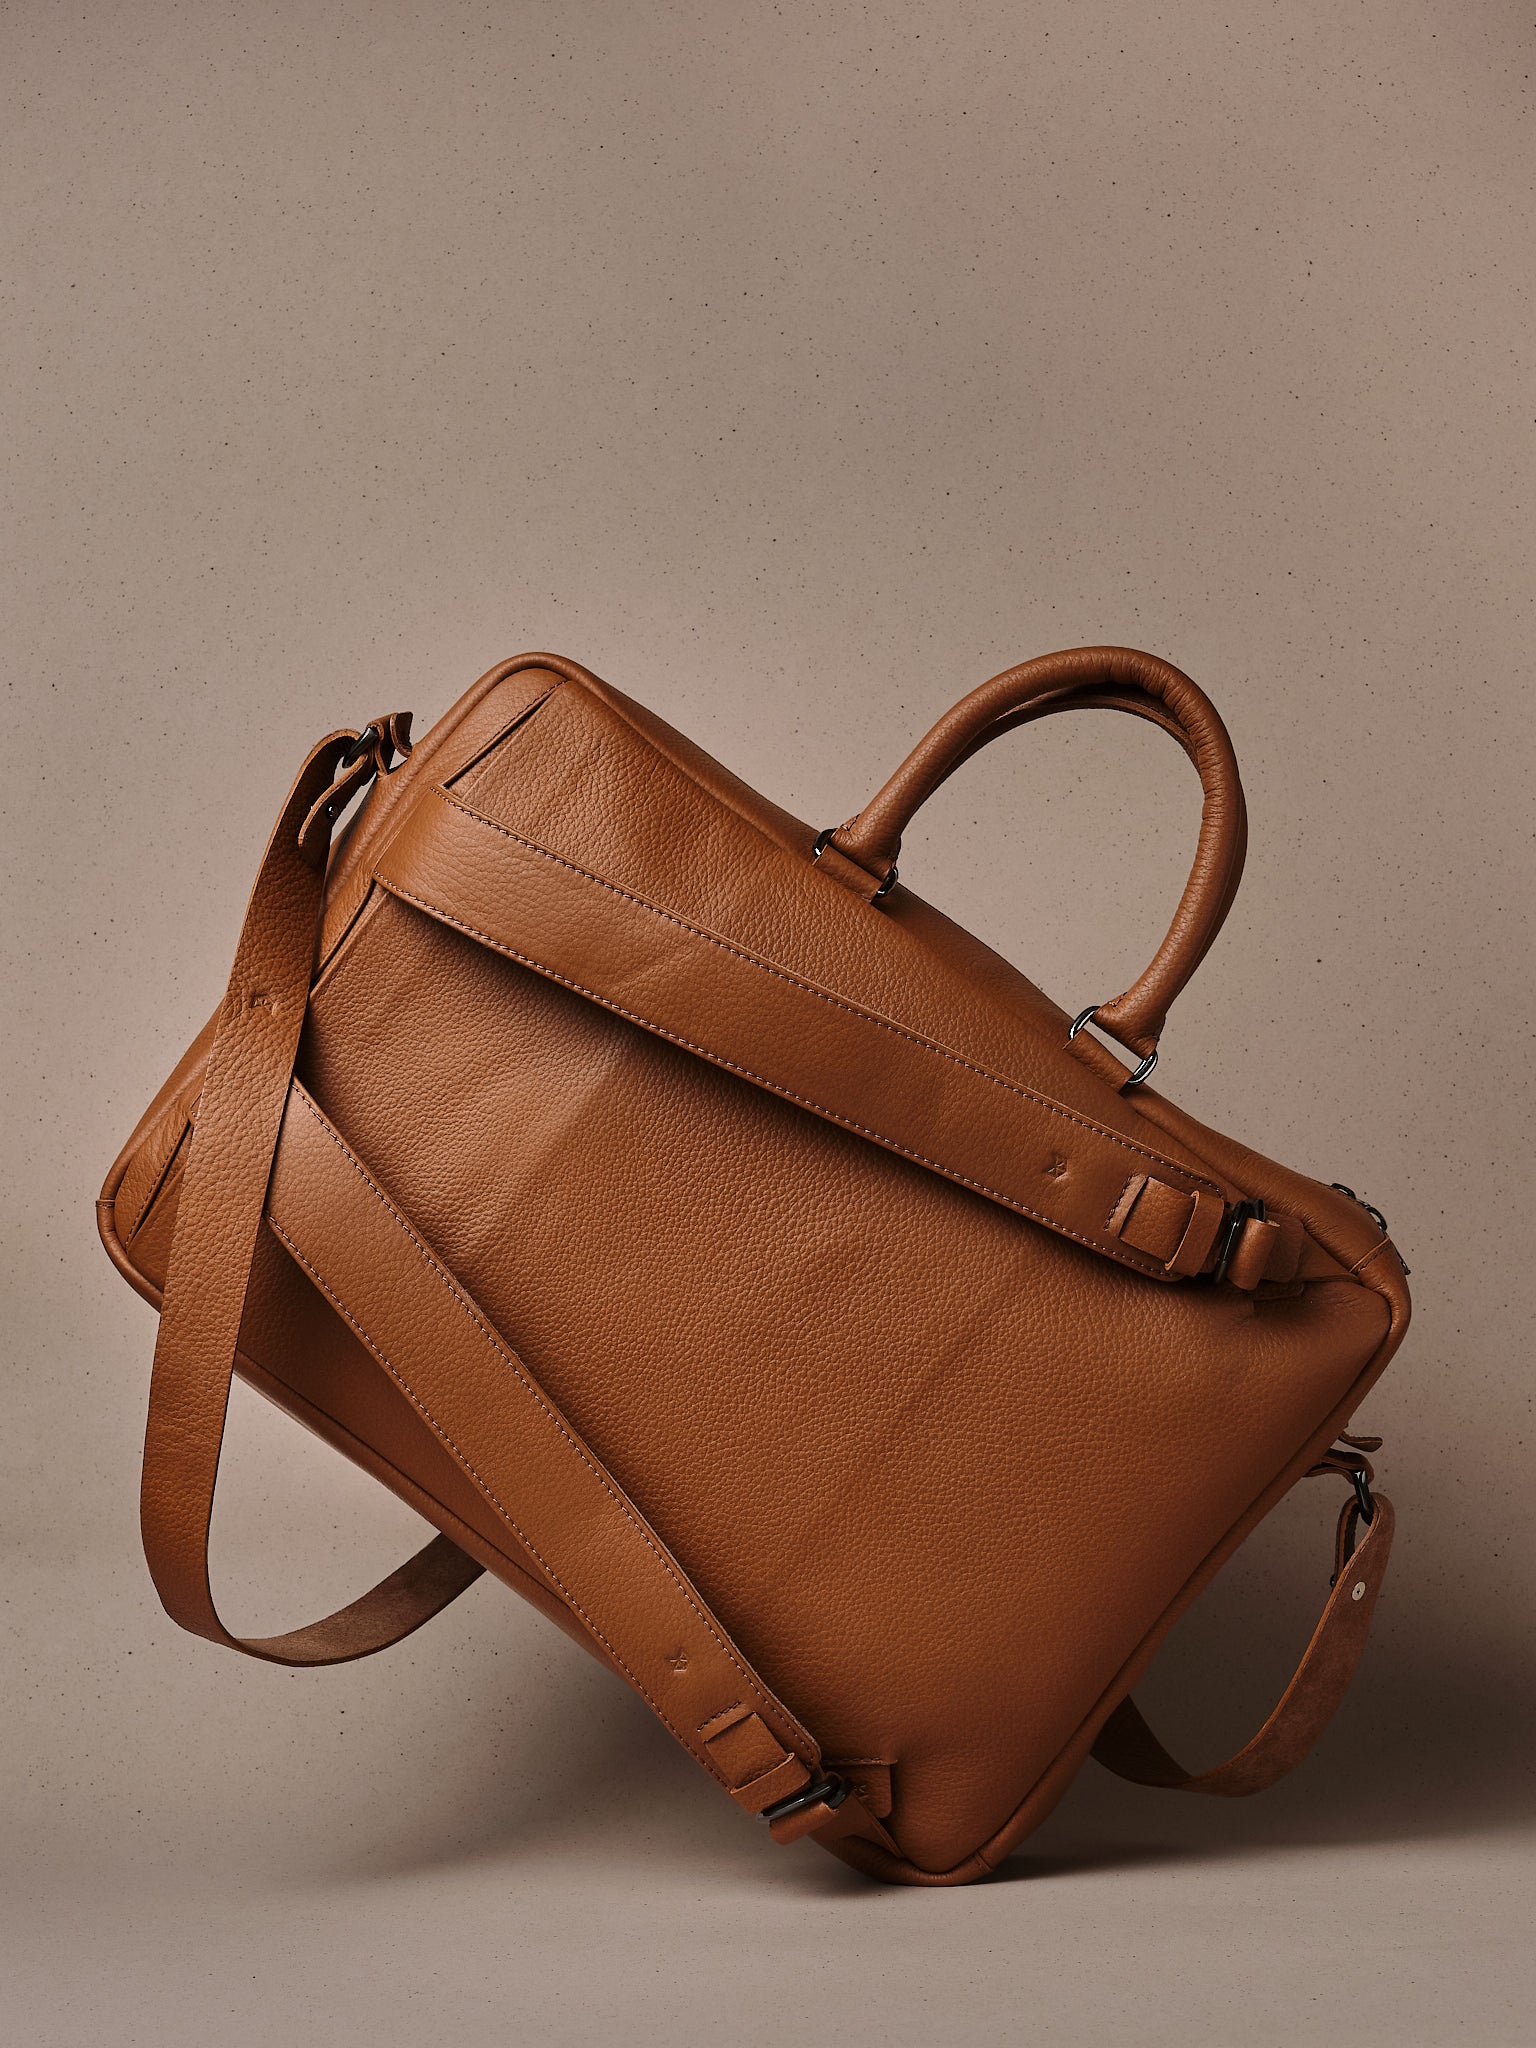 Business Briefcase. Computer Backpack. Leather Backpack Briefcase Tan by Capra